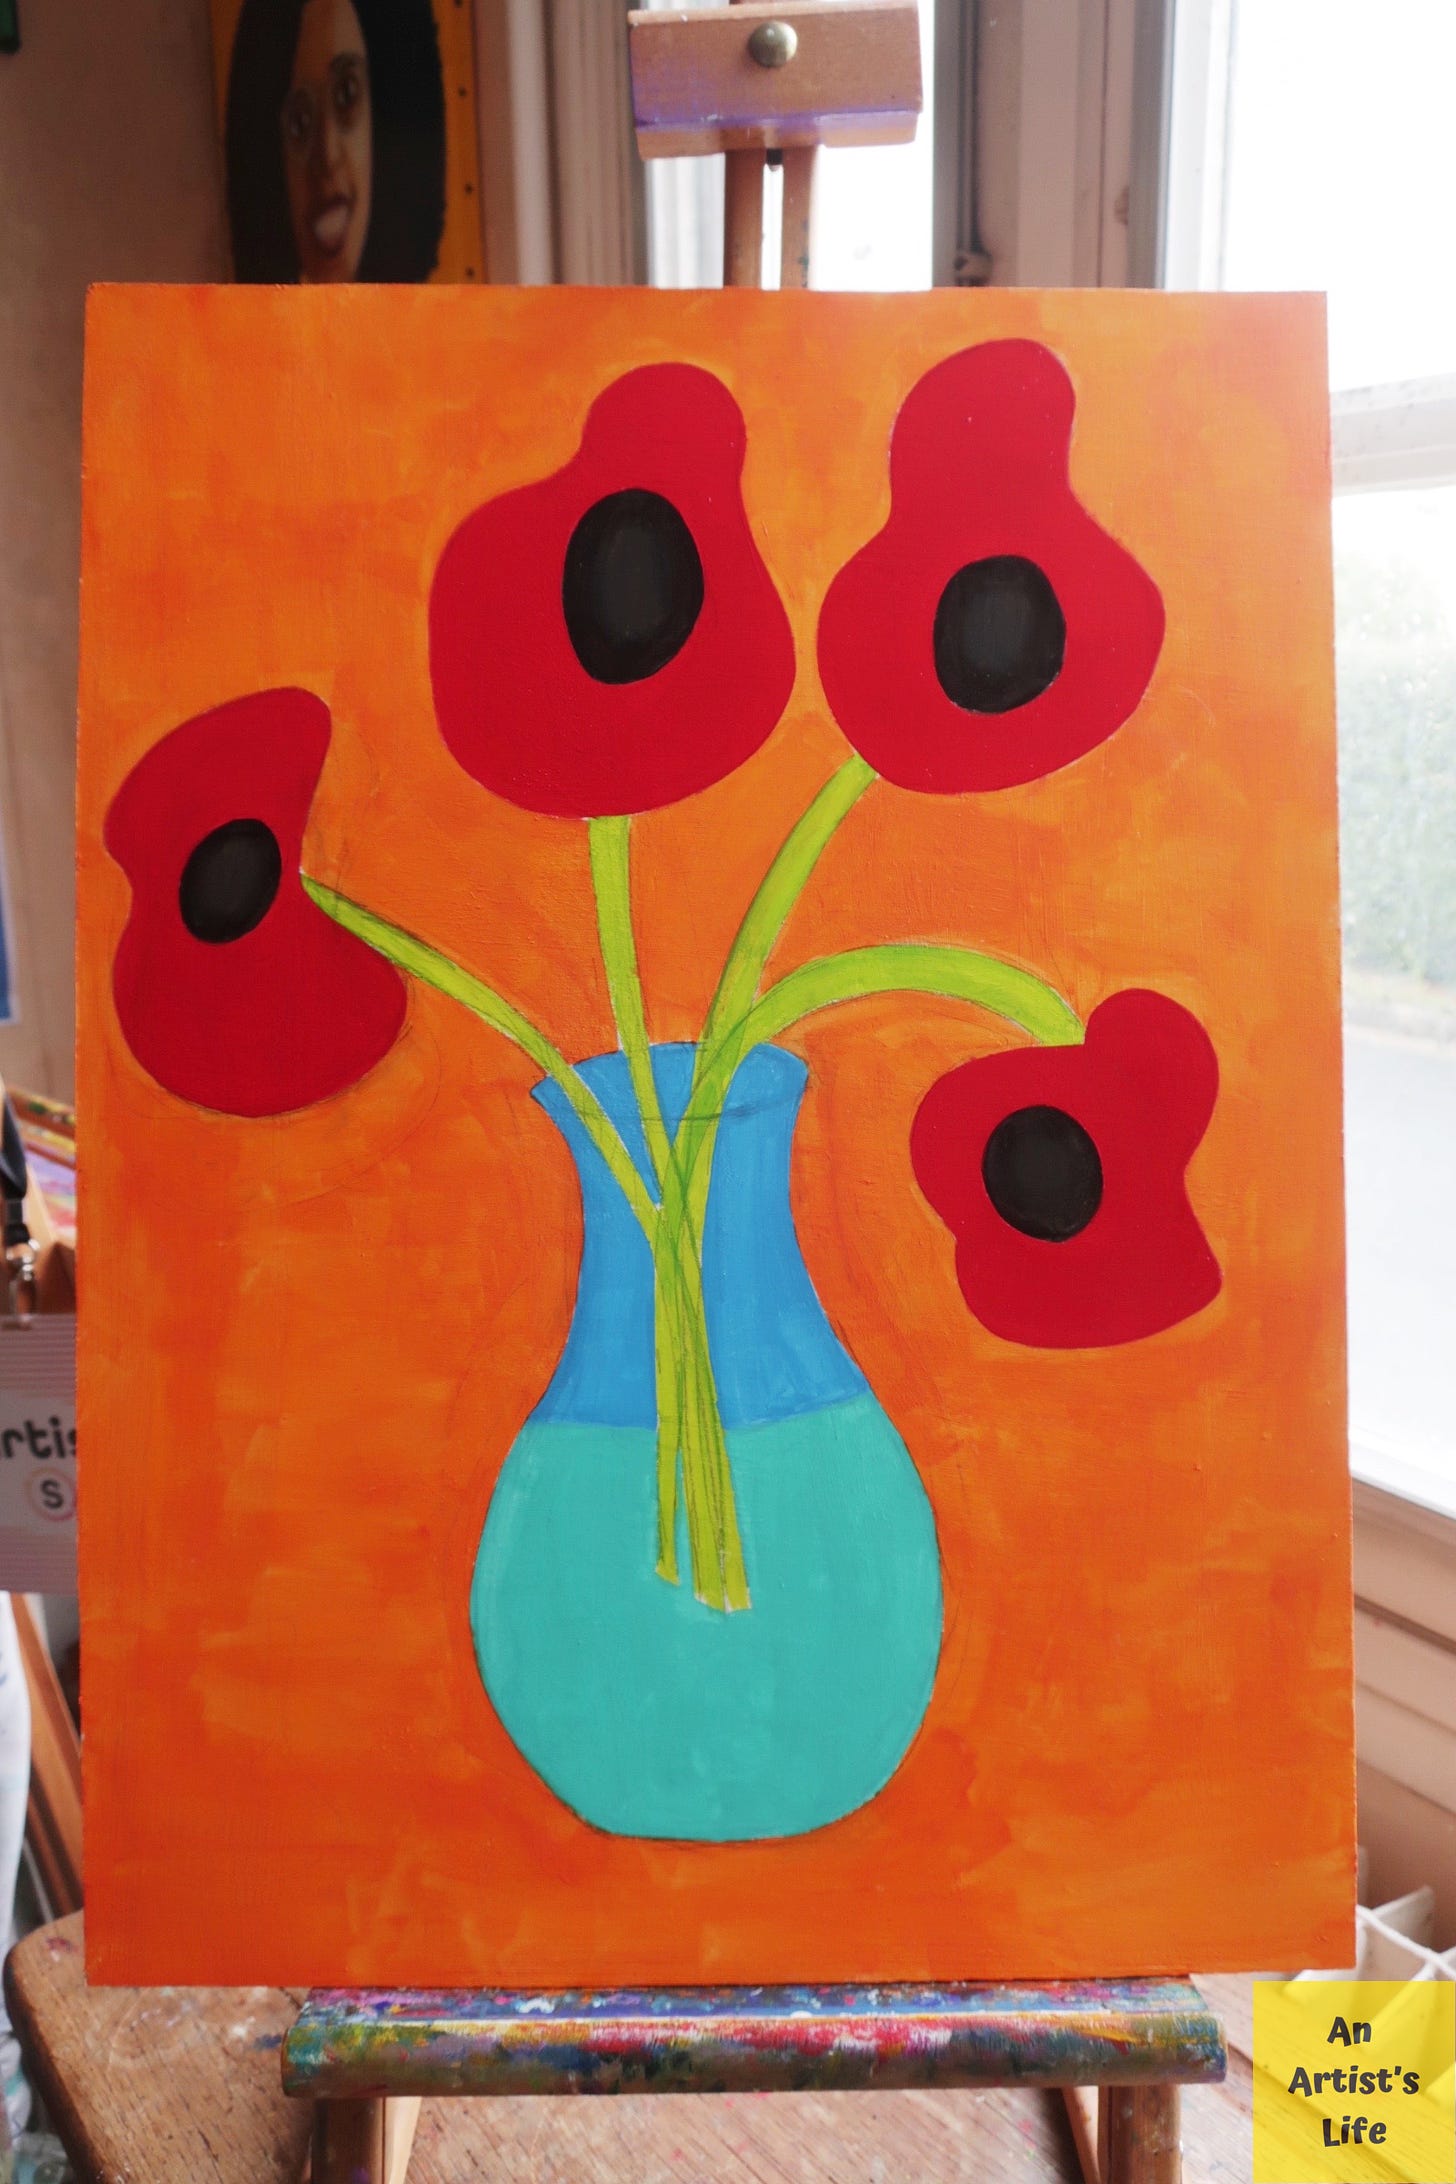 An oil painting of four red poppies in a blue vase on an orange background